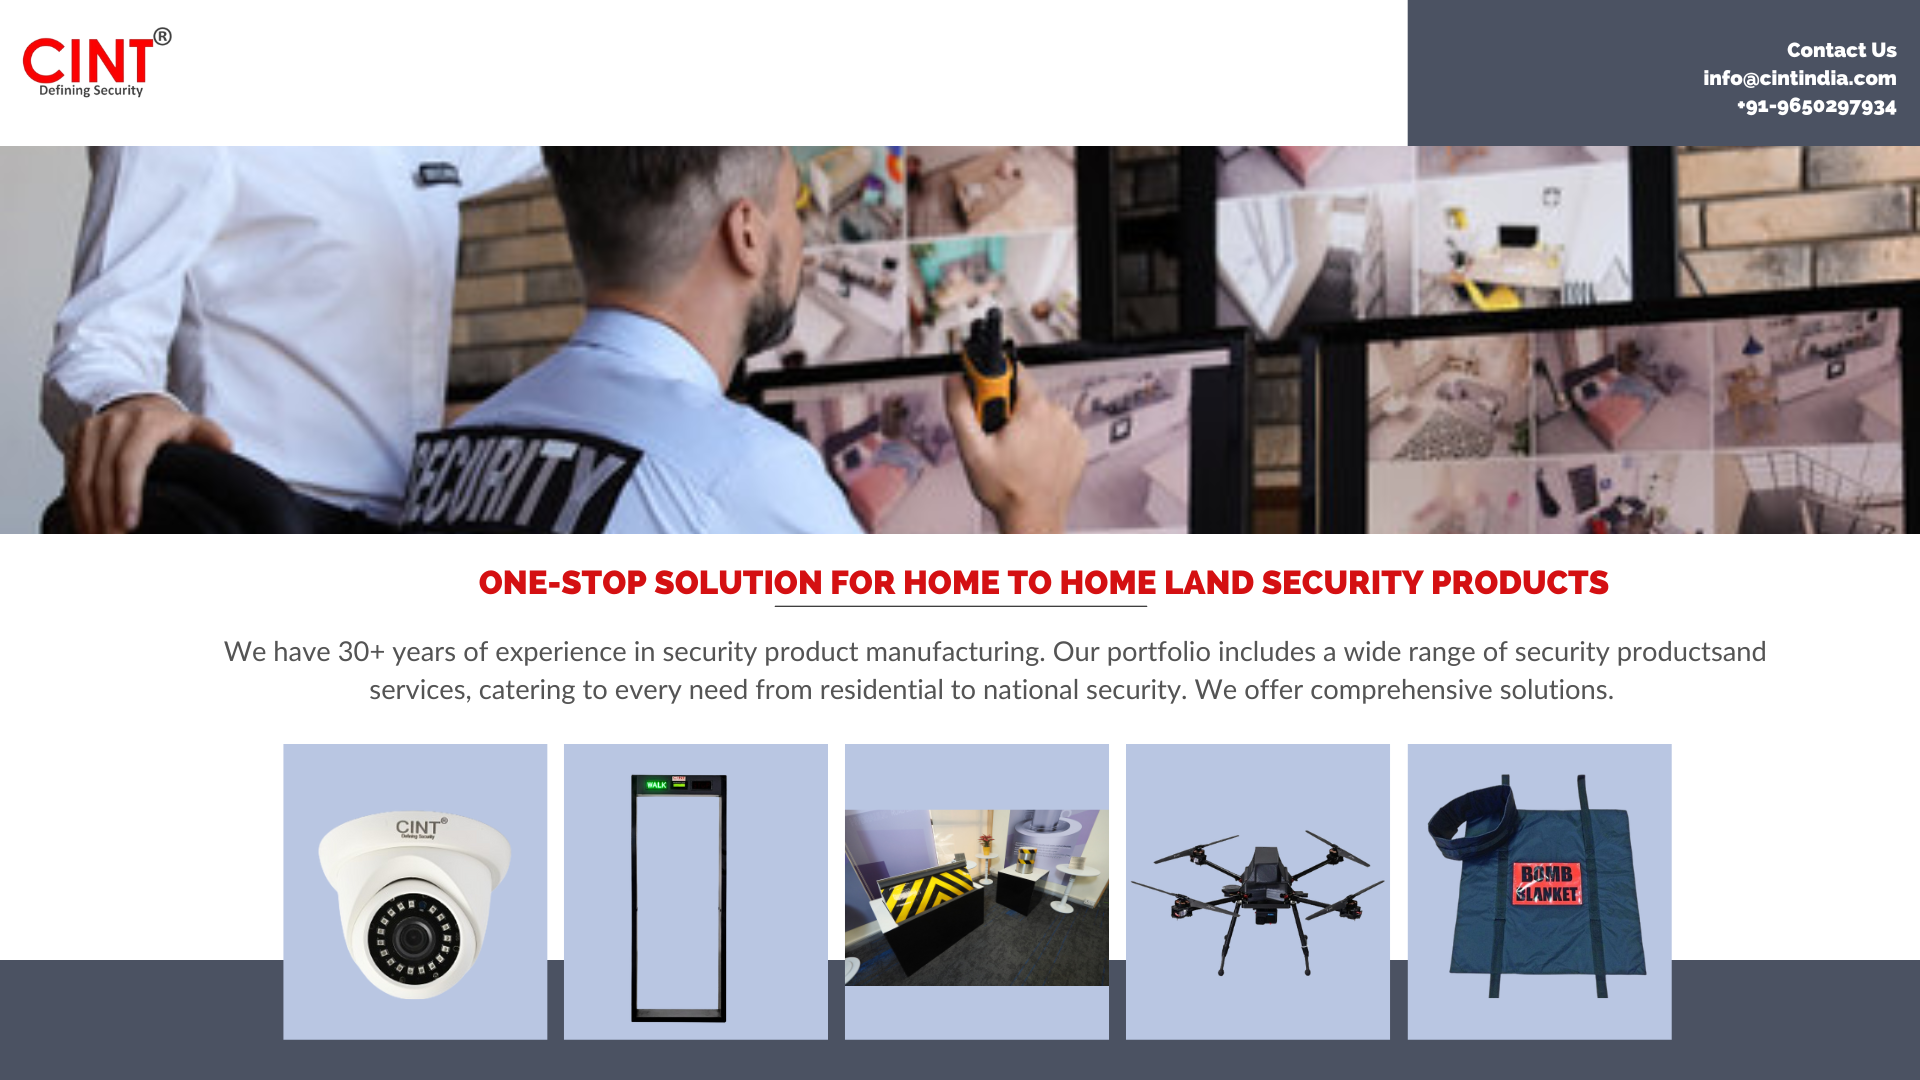 Enhance your security measures with a professional security product manufacturer